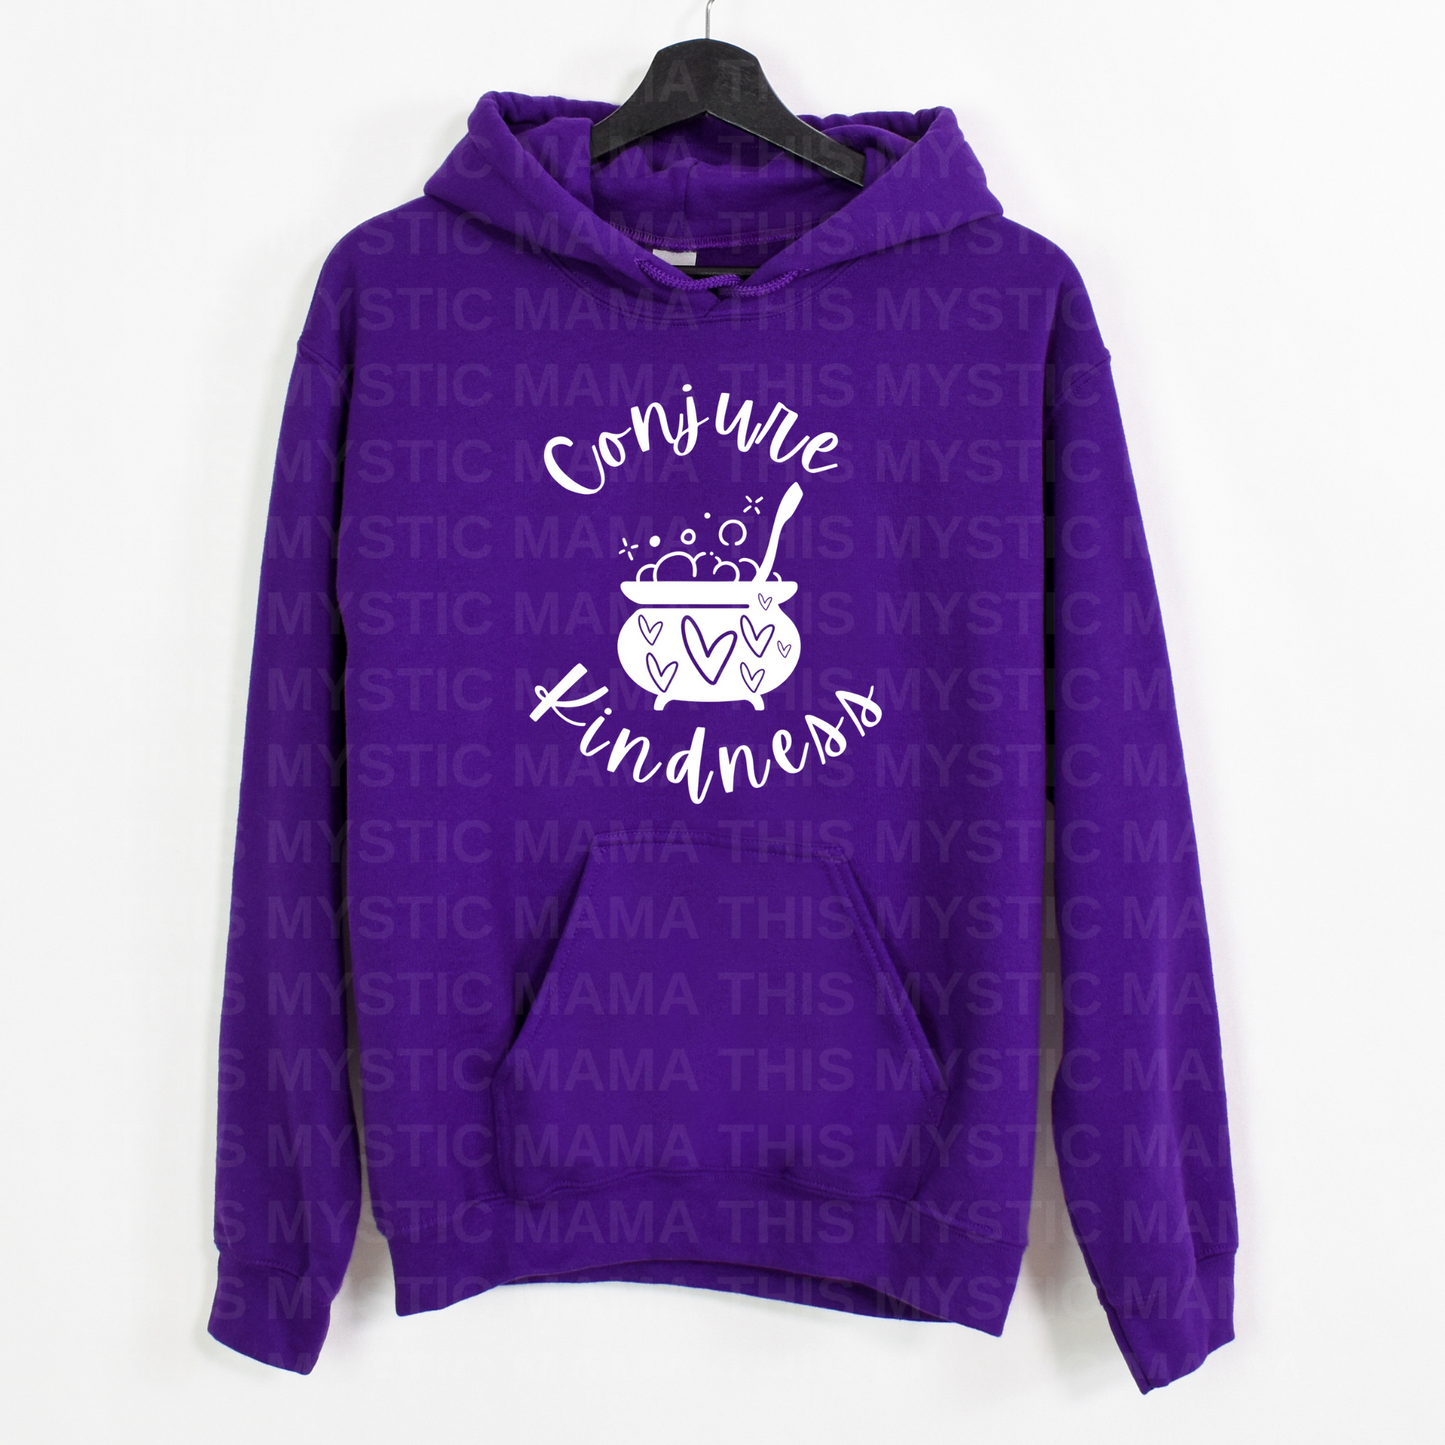 "Conjure Kindness" Inspirational Hoodie